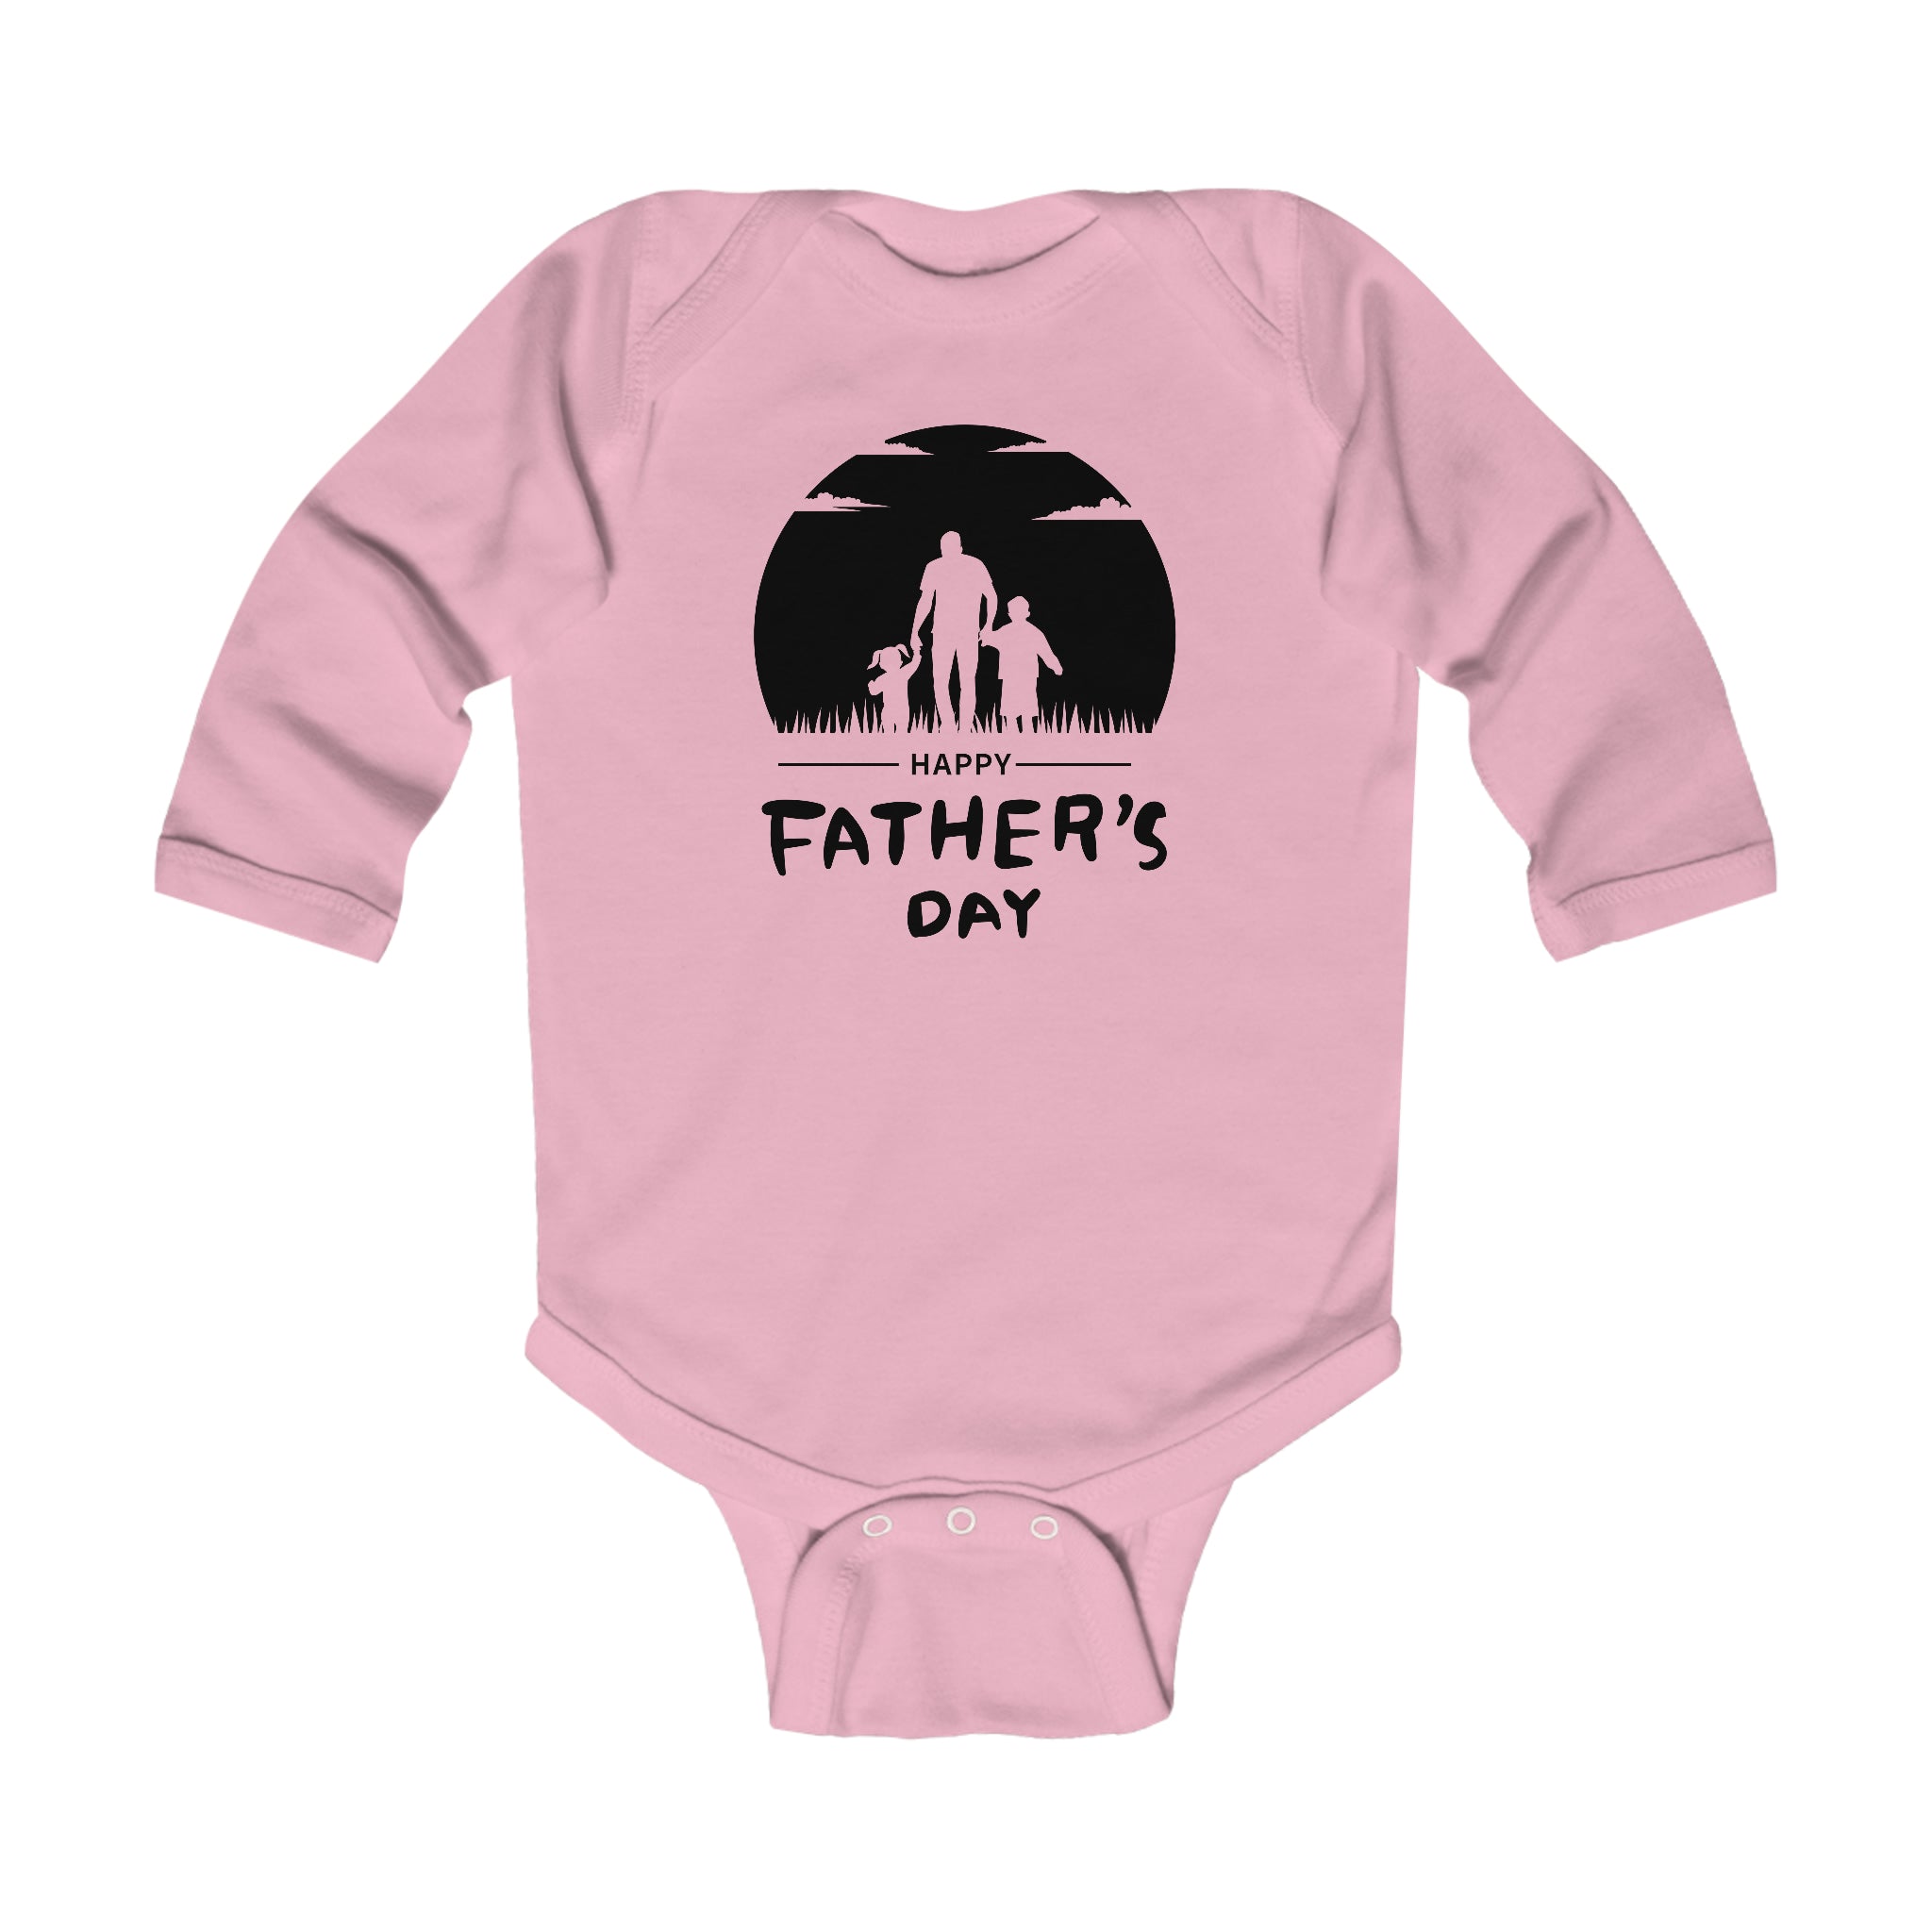 Happy Father's Day Long Sleeve Baby Bodysuit